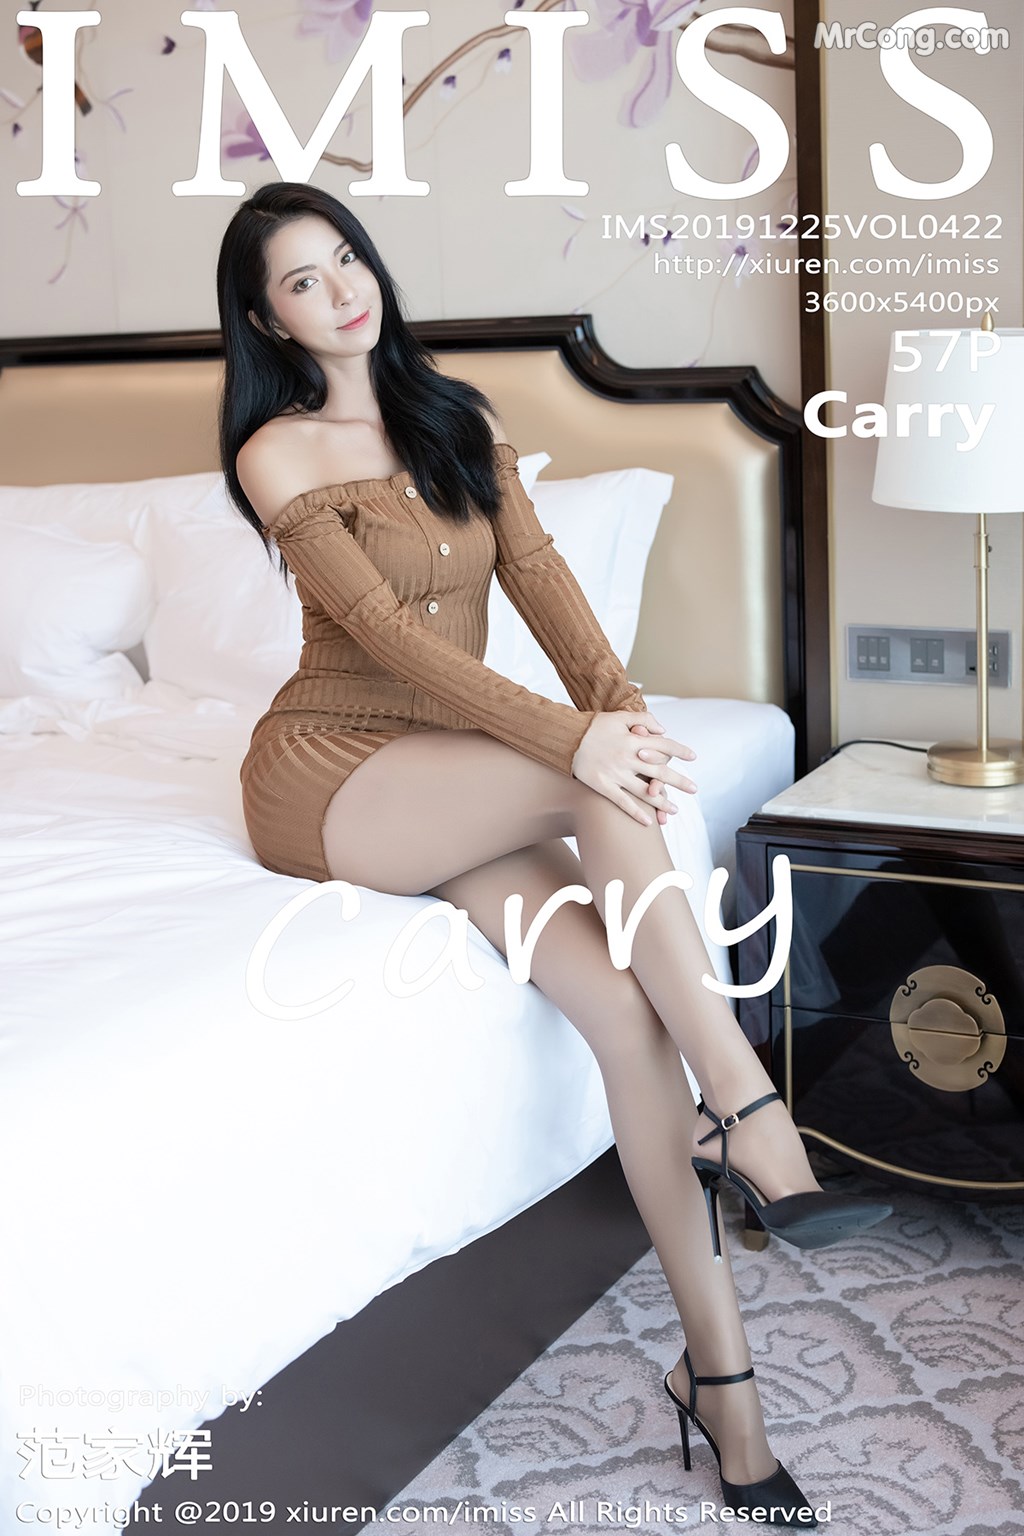 IMISS Vol.422: Carry (58 pictures)